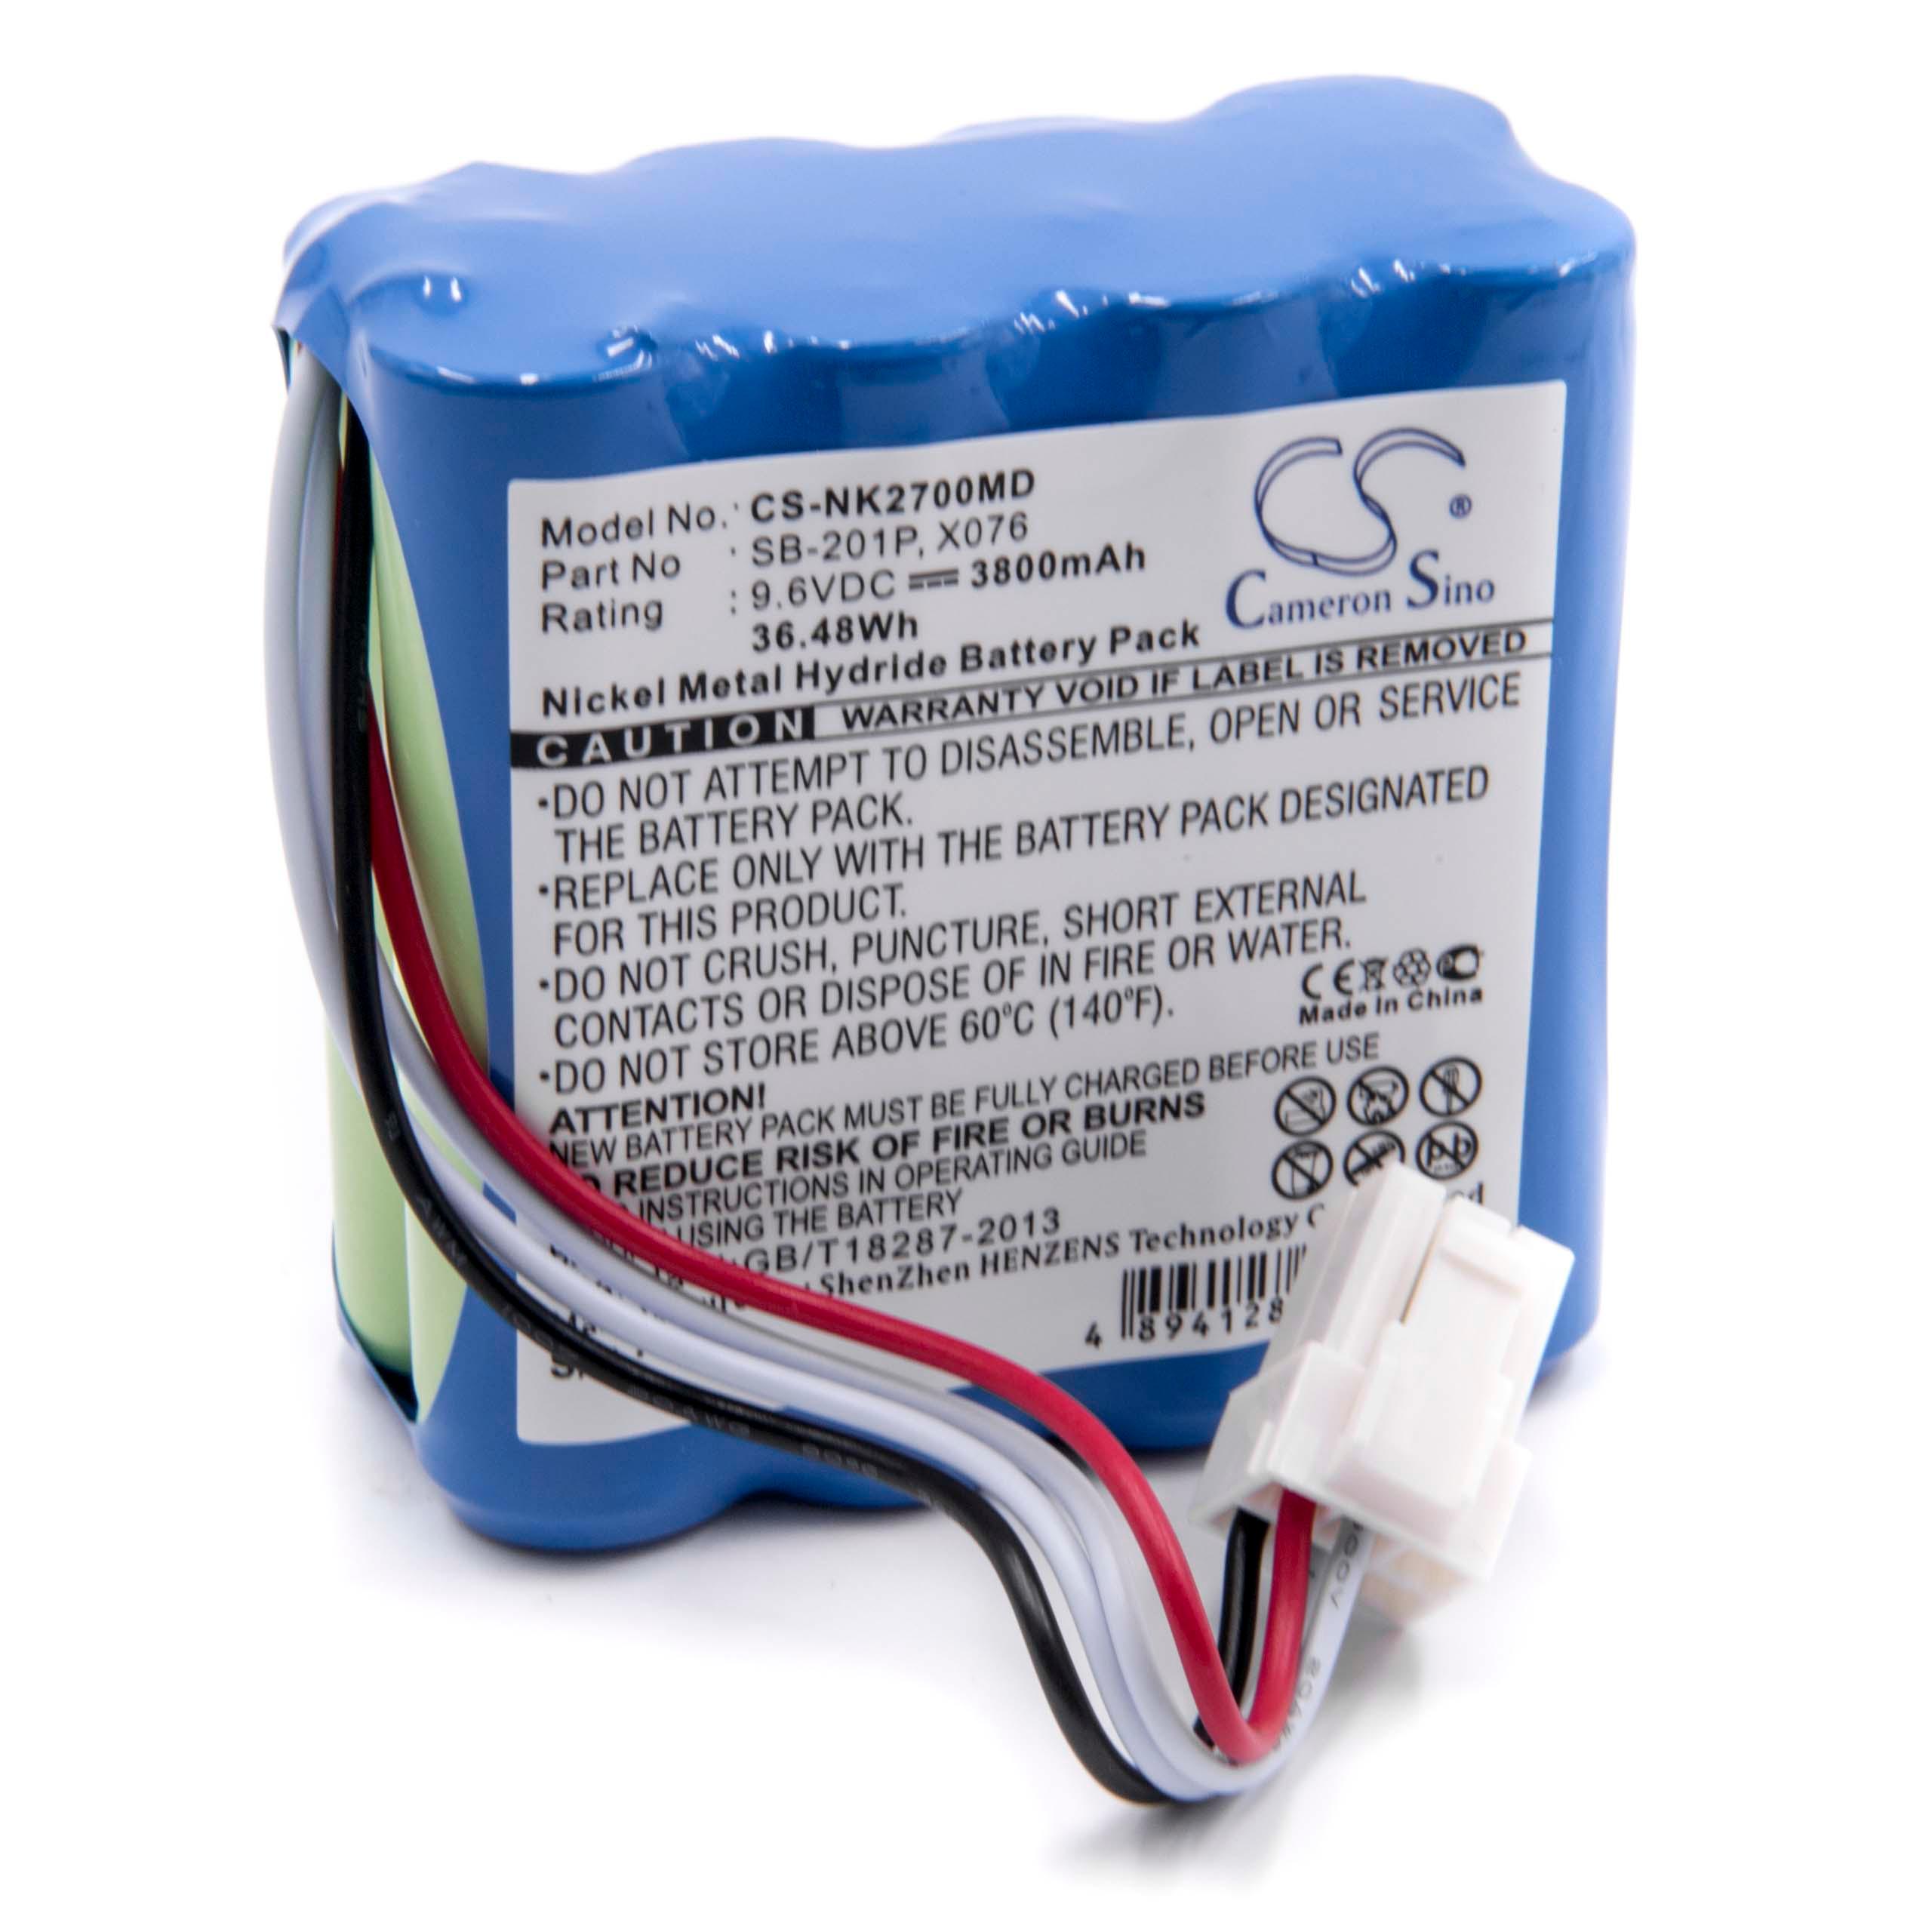 Medical Equipment Battery Replacement for SB-201P - 3800mAh 9.6V NiMH